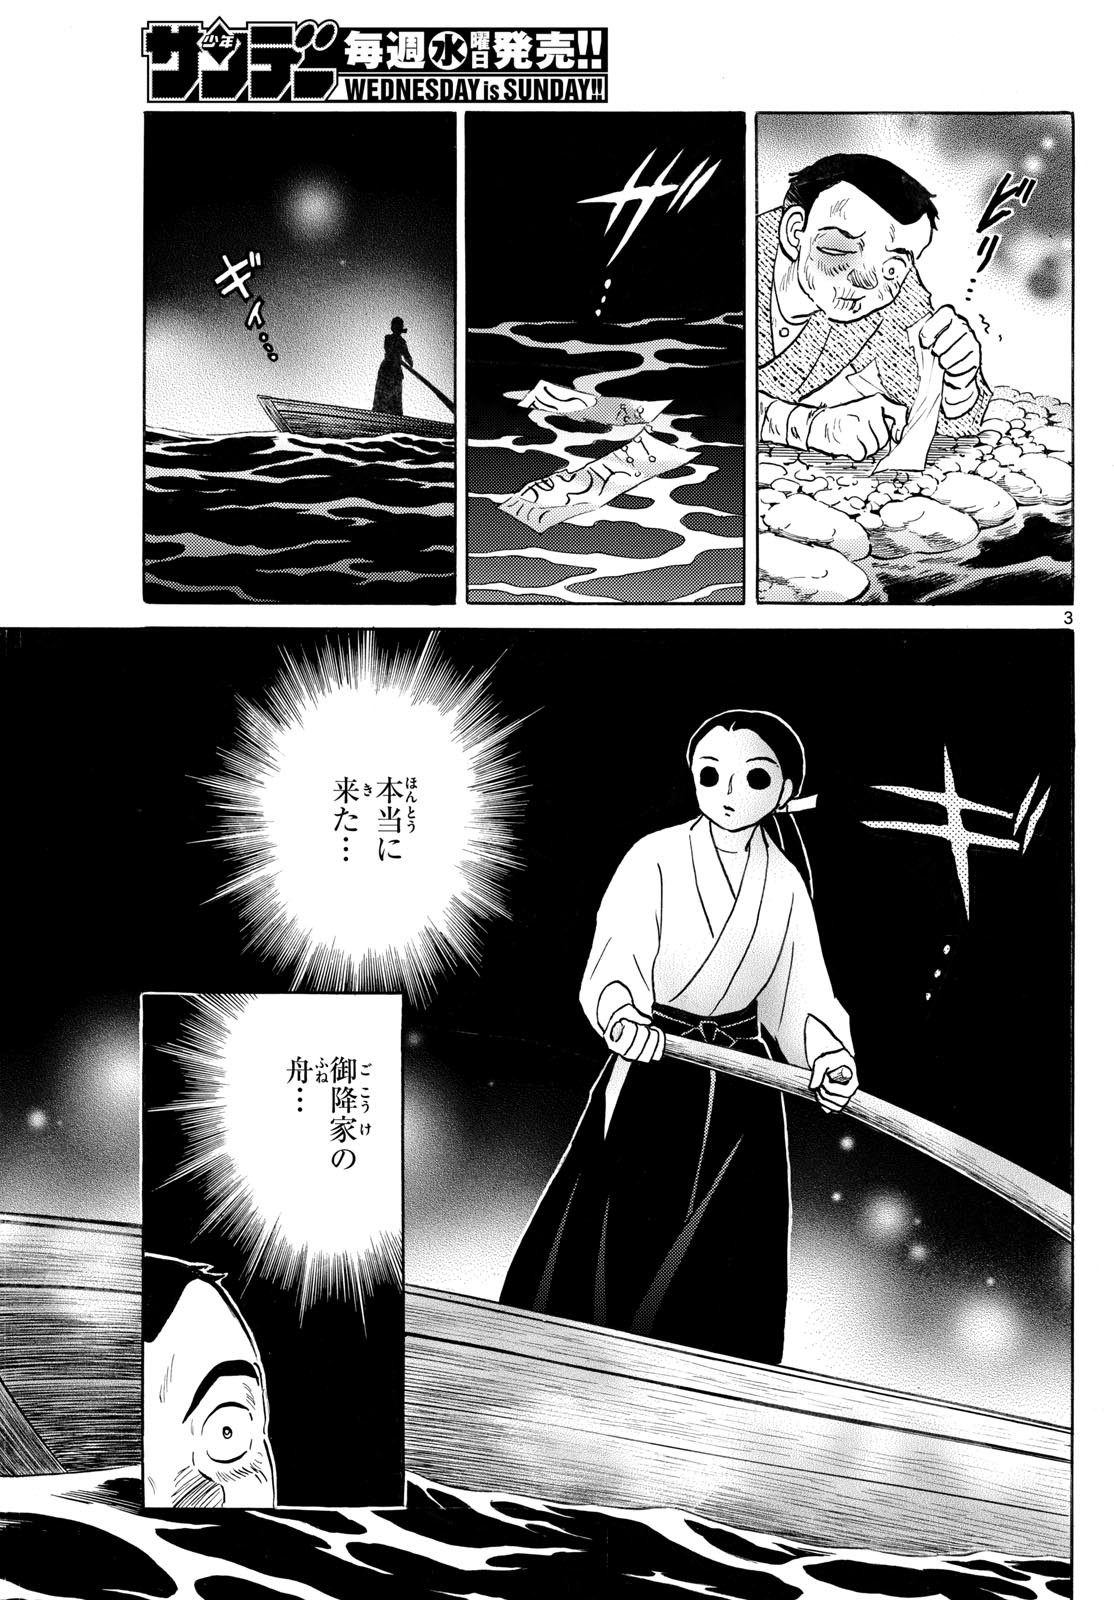 MAO - Chapter 226 - Page 3